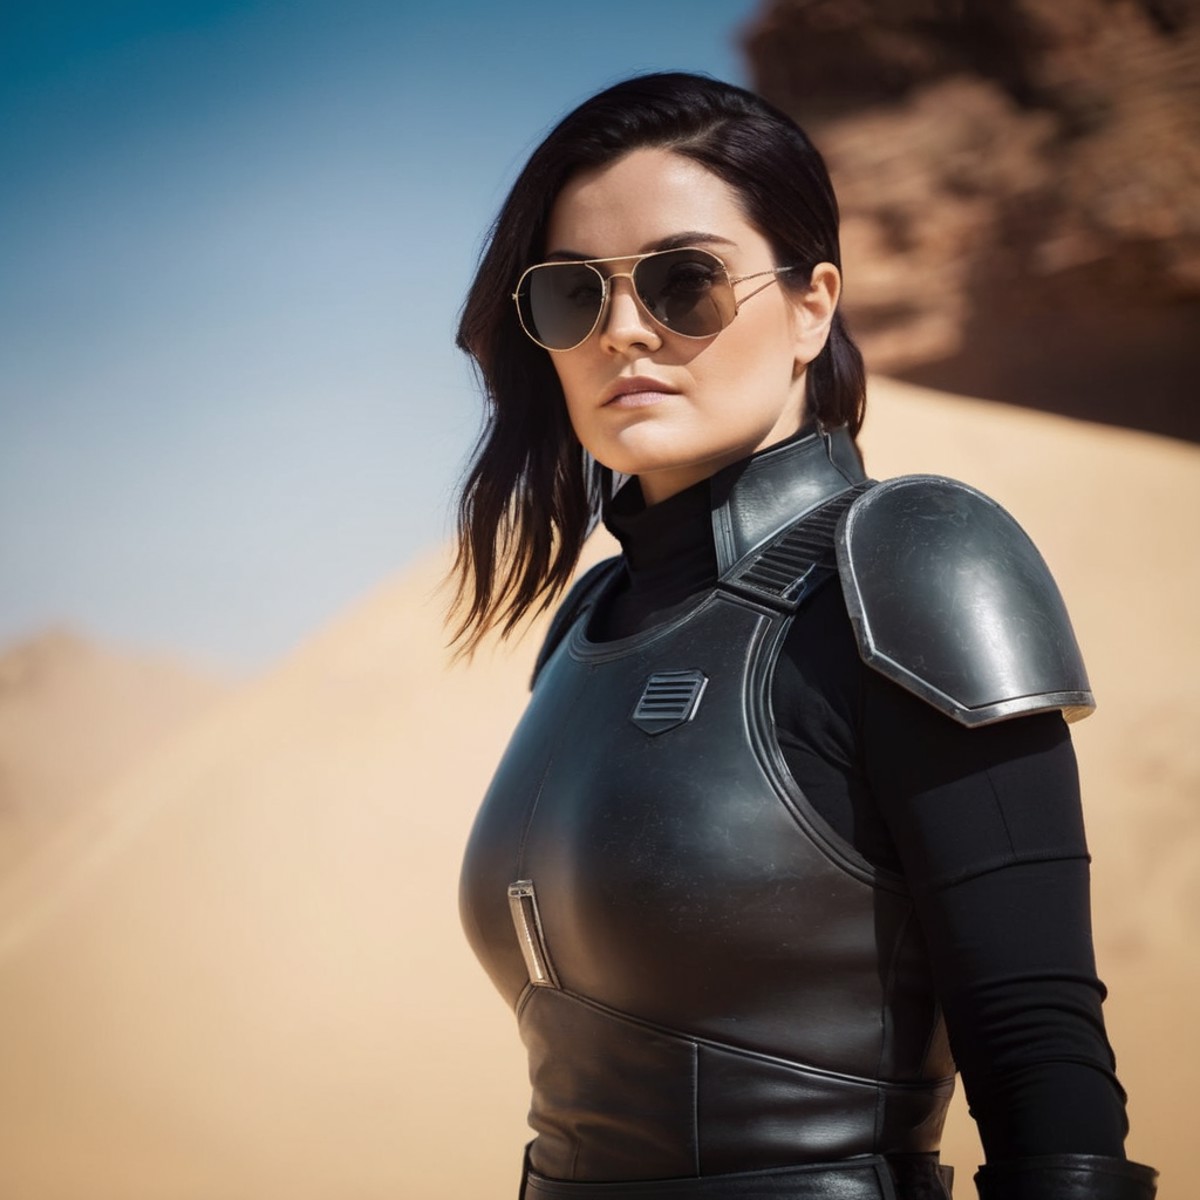 cinematic film still of  <lora:Cara Dune:1.2>
Cara Dune a woman in a black outfit and sunglasses in star wars universe, sh...